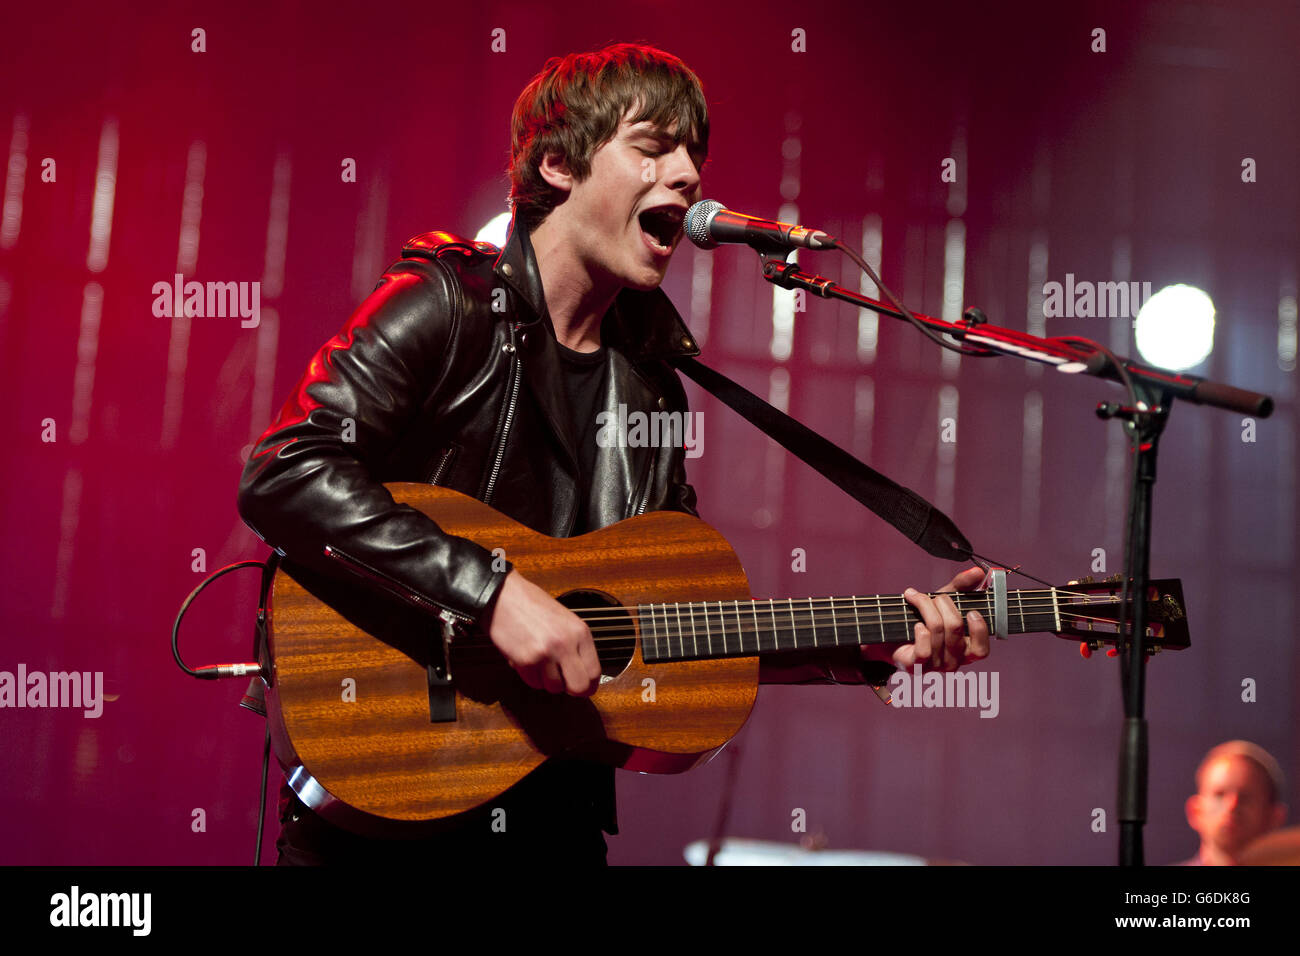 iTunes Festival - Jake Bugg - London. Jake Bugg performs on stage at the Roundhouse, London, during the iTunes Festival. Stock Photo